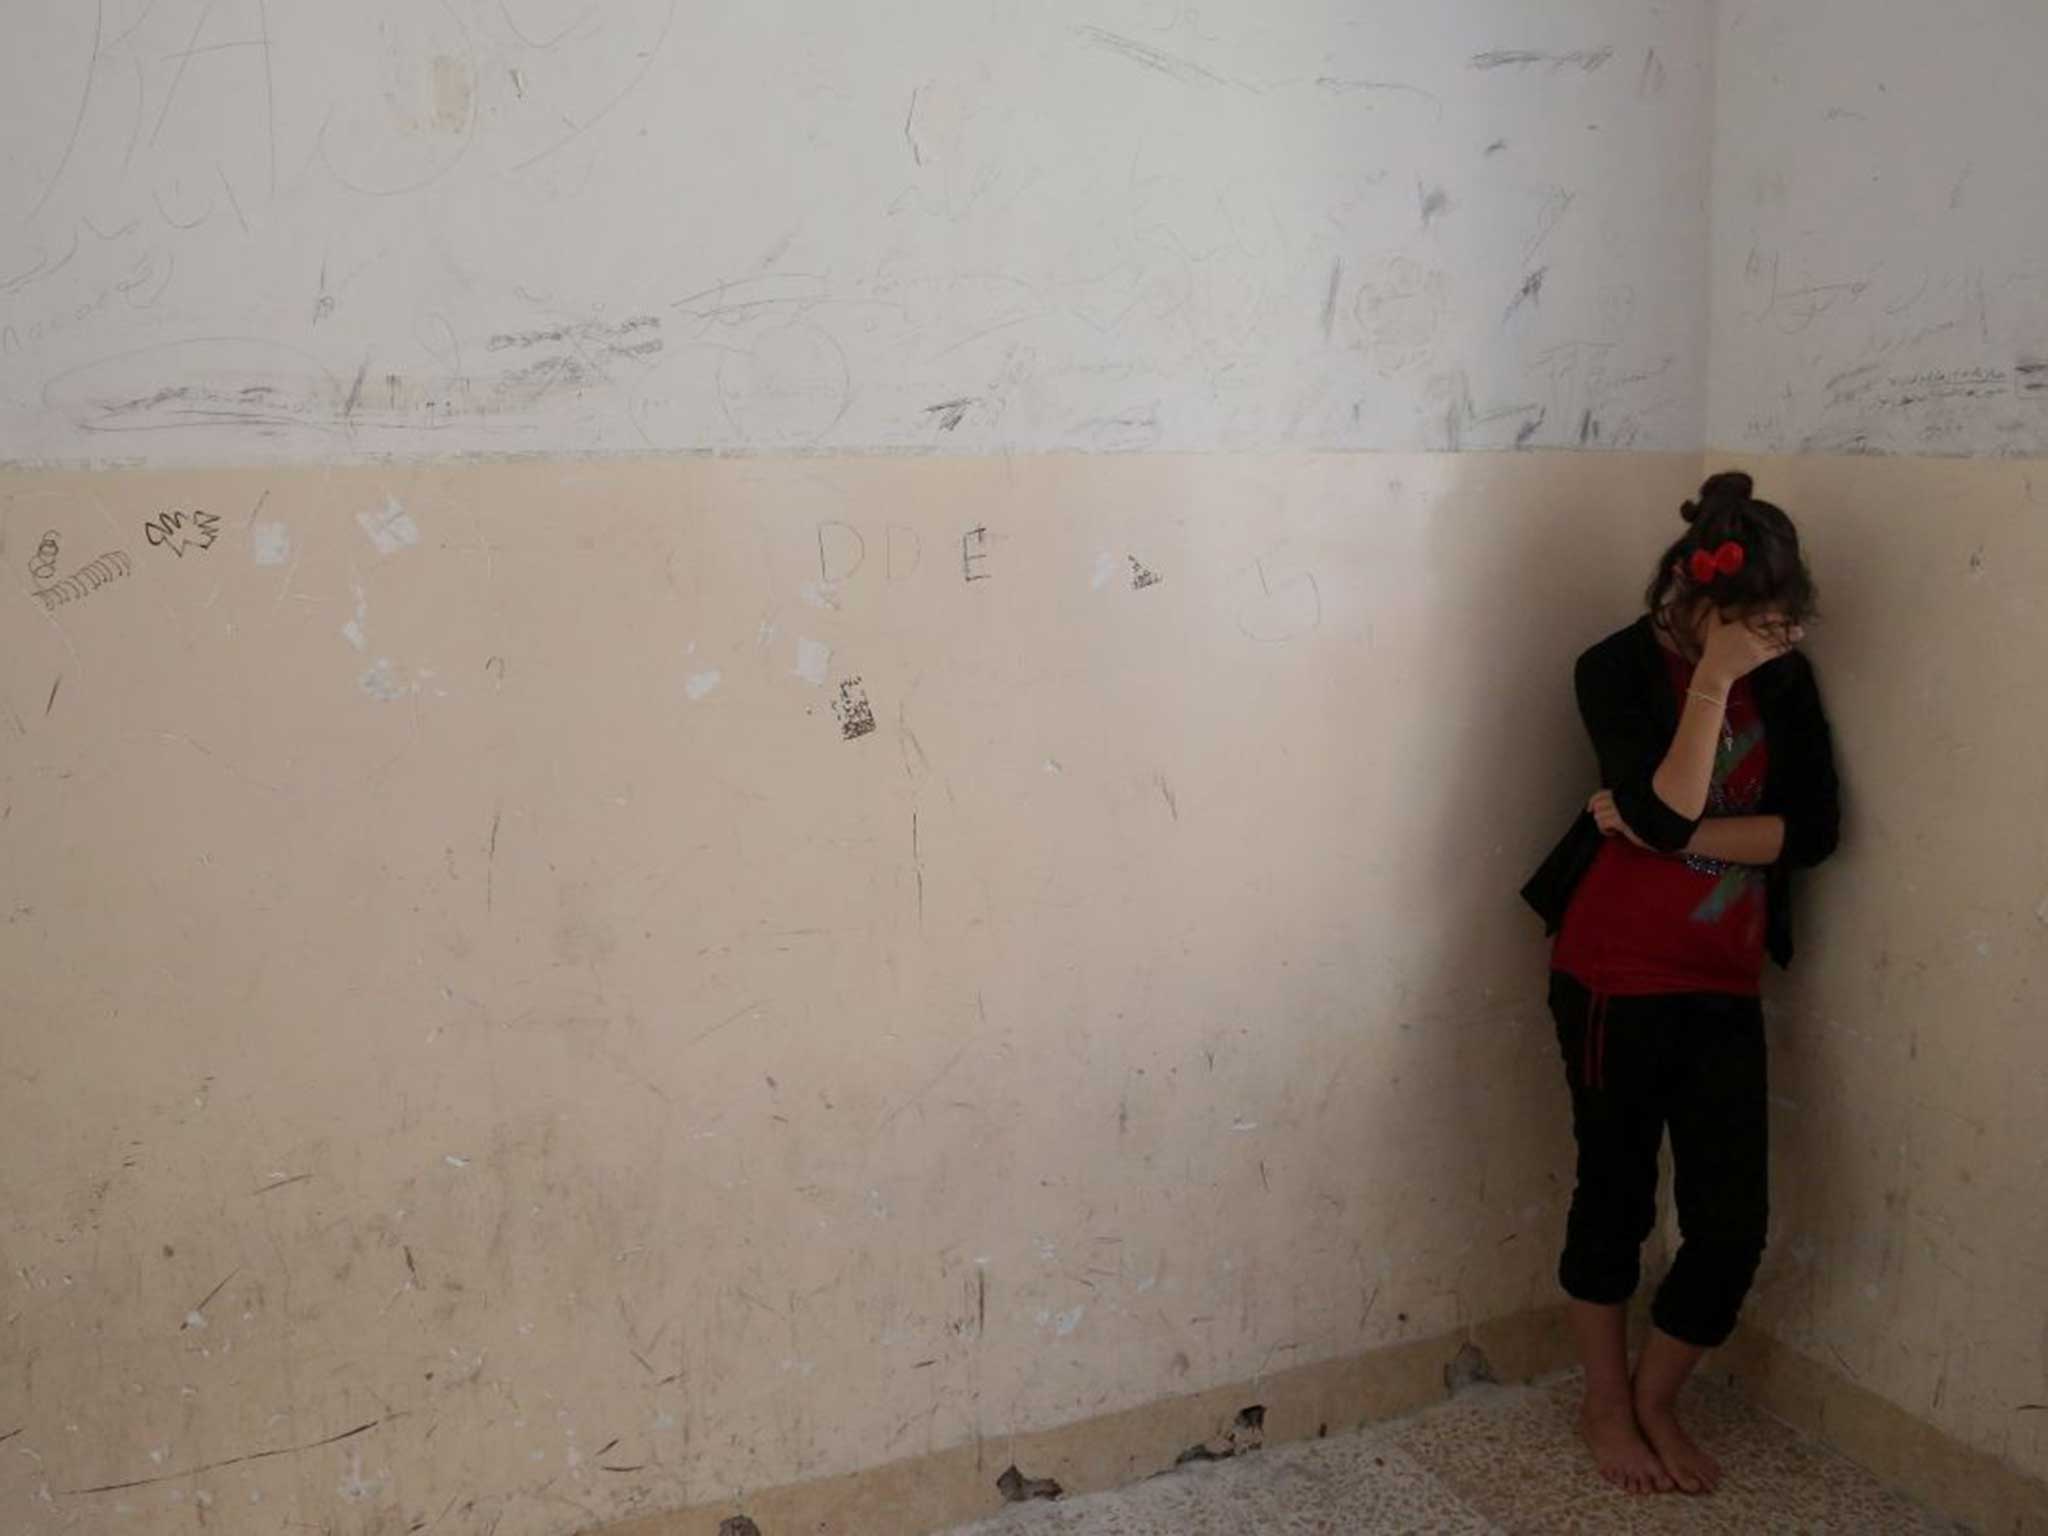 Yazidi women released by Isis this week were gang-raped in public by fighters